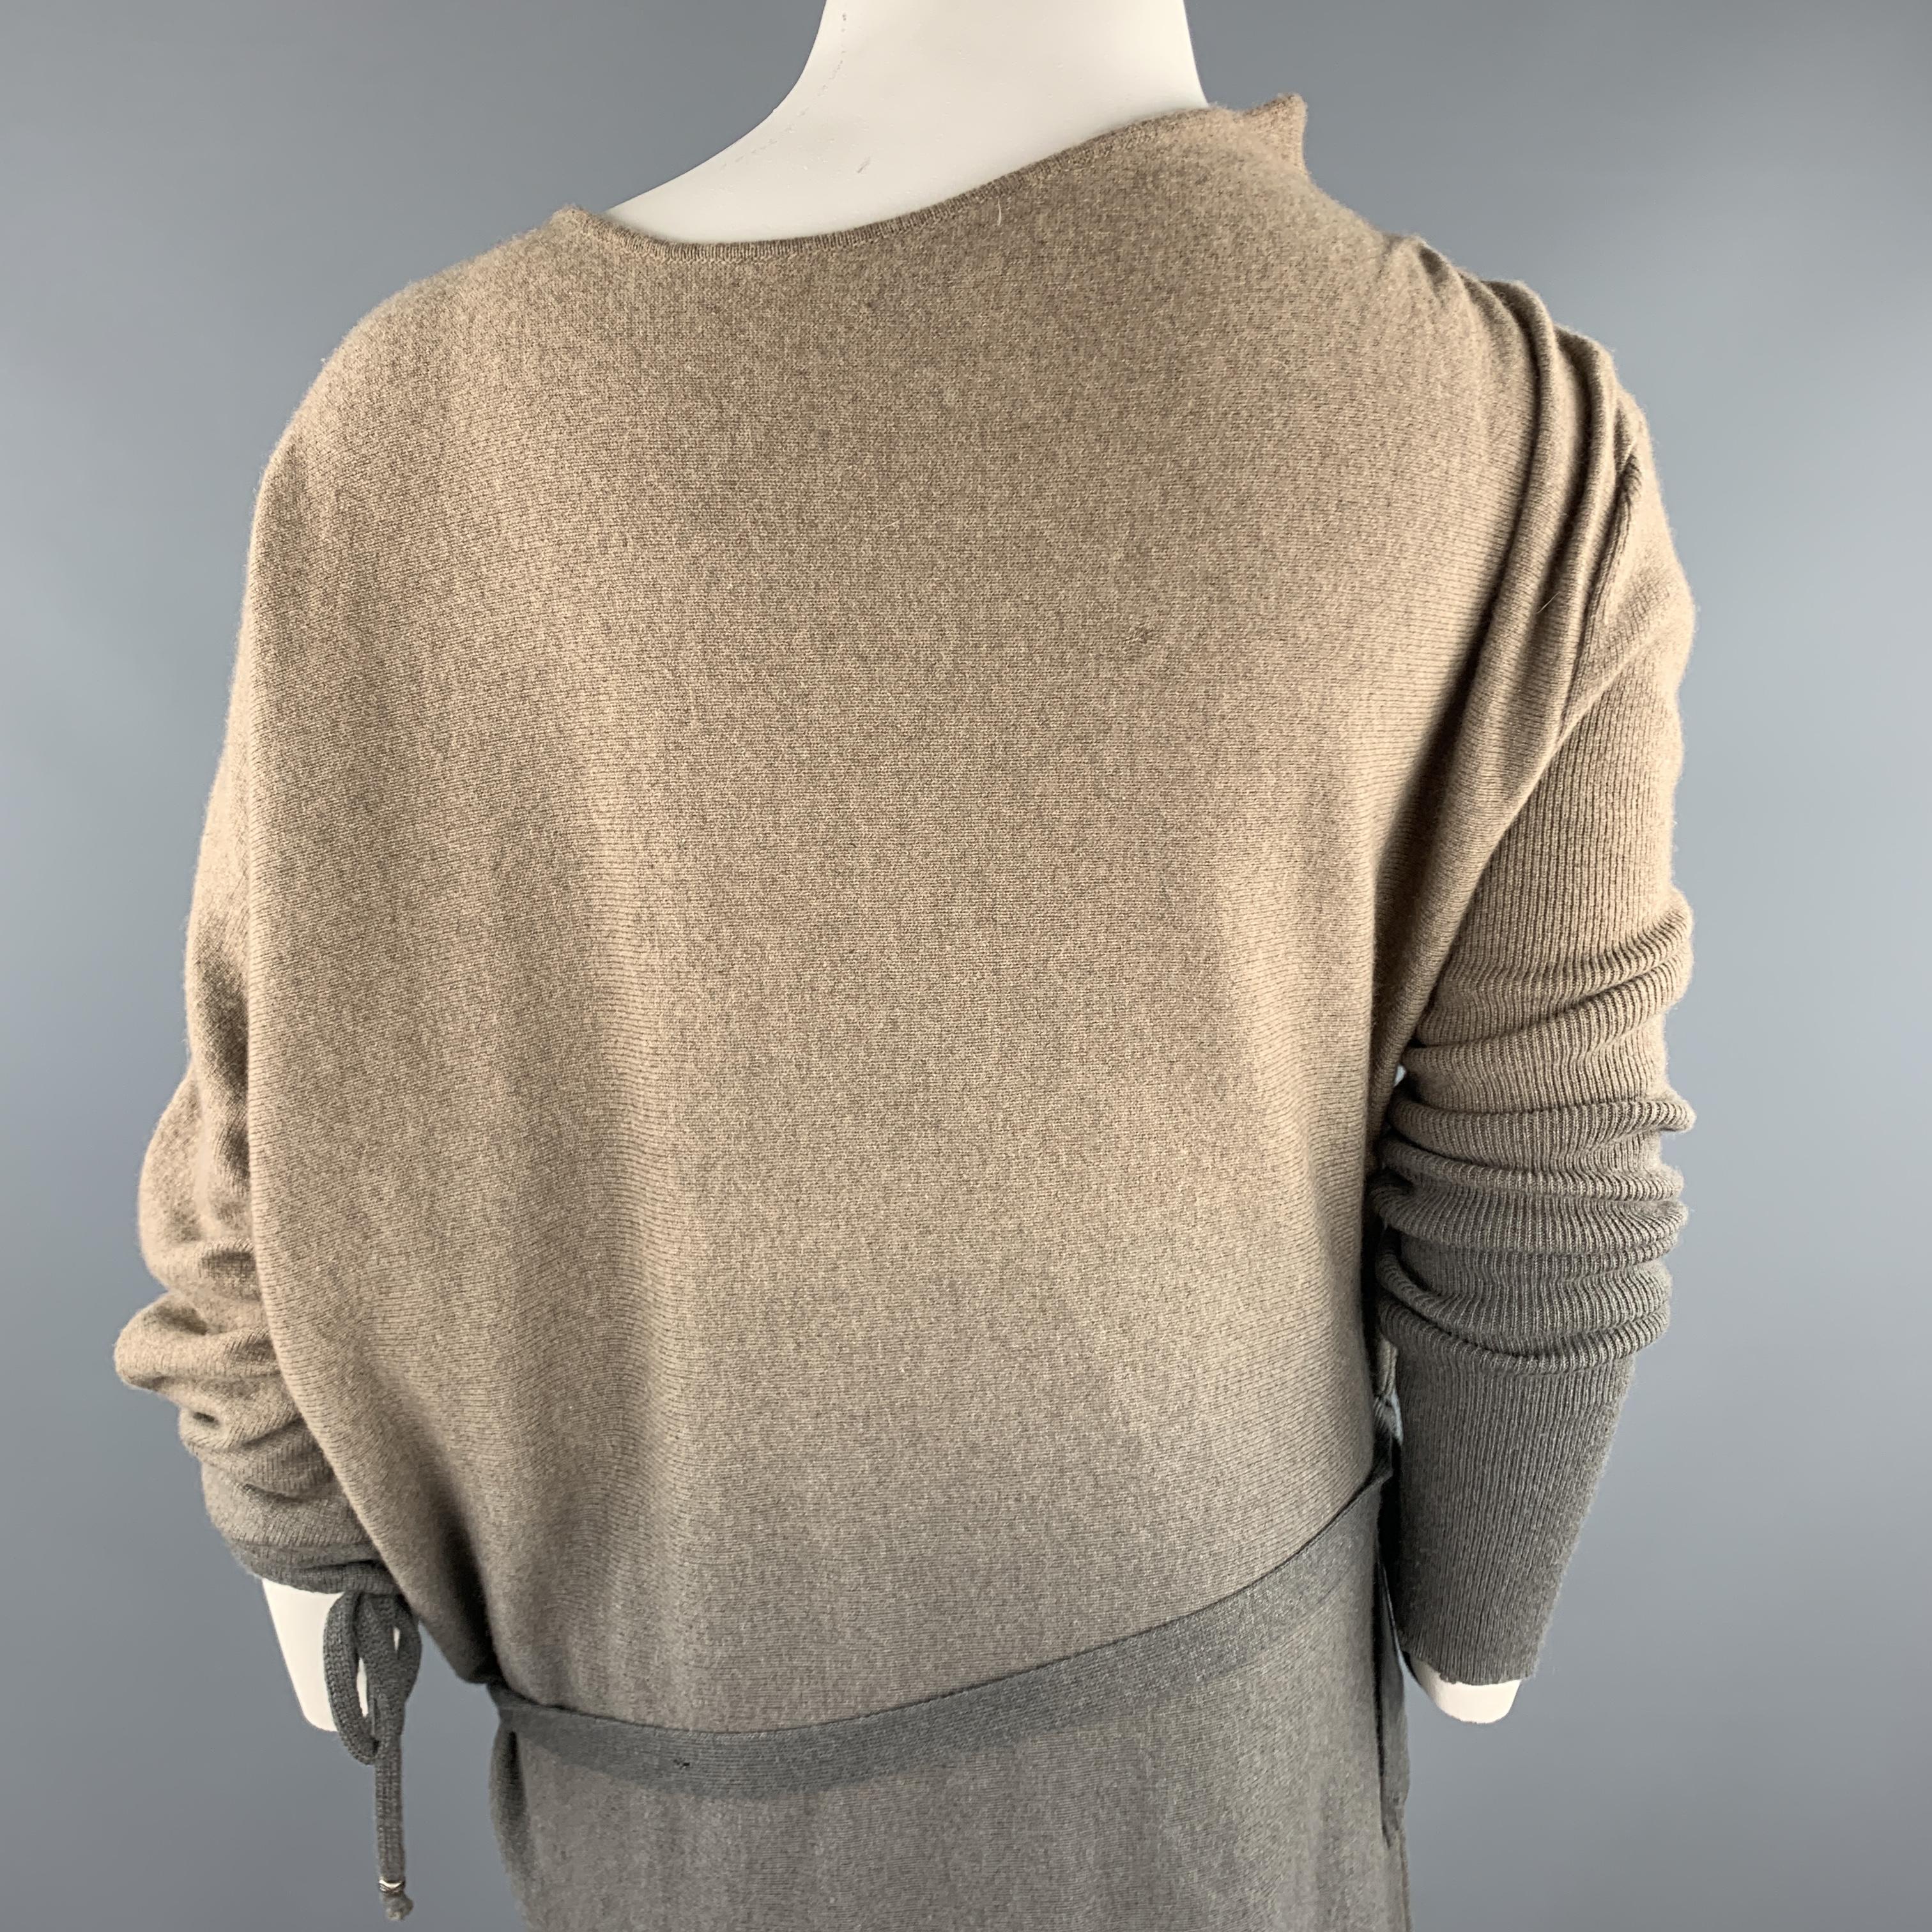 HENRY BEGUELIN Size M Taupe & Grey Ombre Asymmetrical Cashmere Dress 1